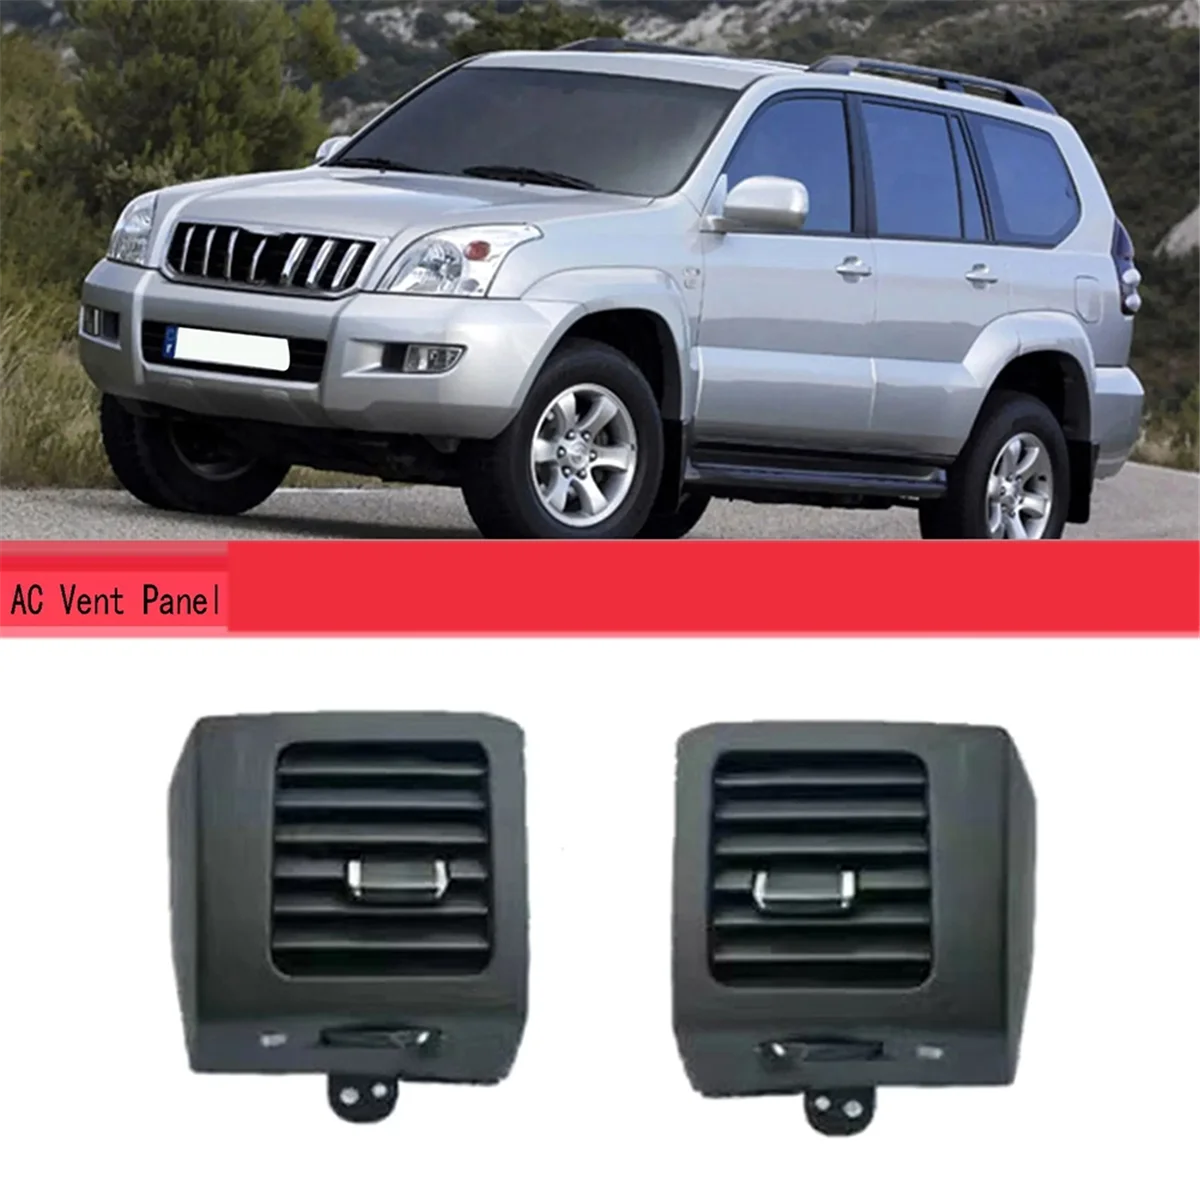 

Black Dashboard Air Vent Outlet for Land Cruiser Prado 120 GX470 03-09 Air Conditioning Conditioner Grille